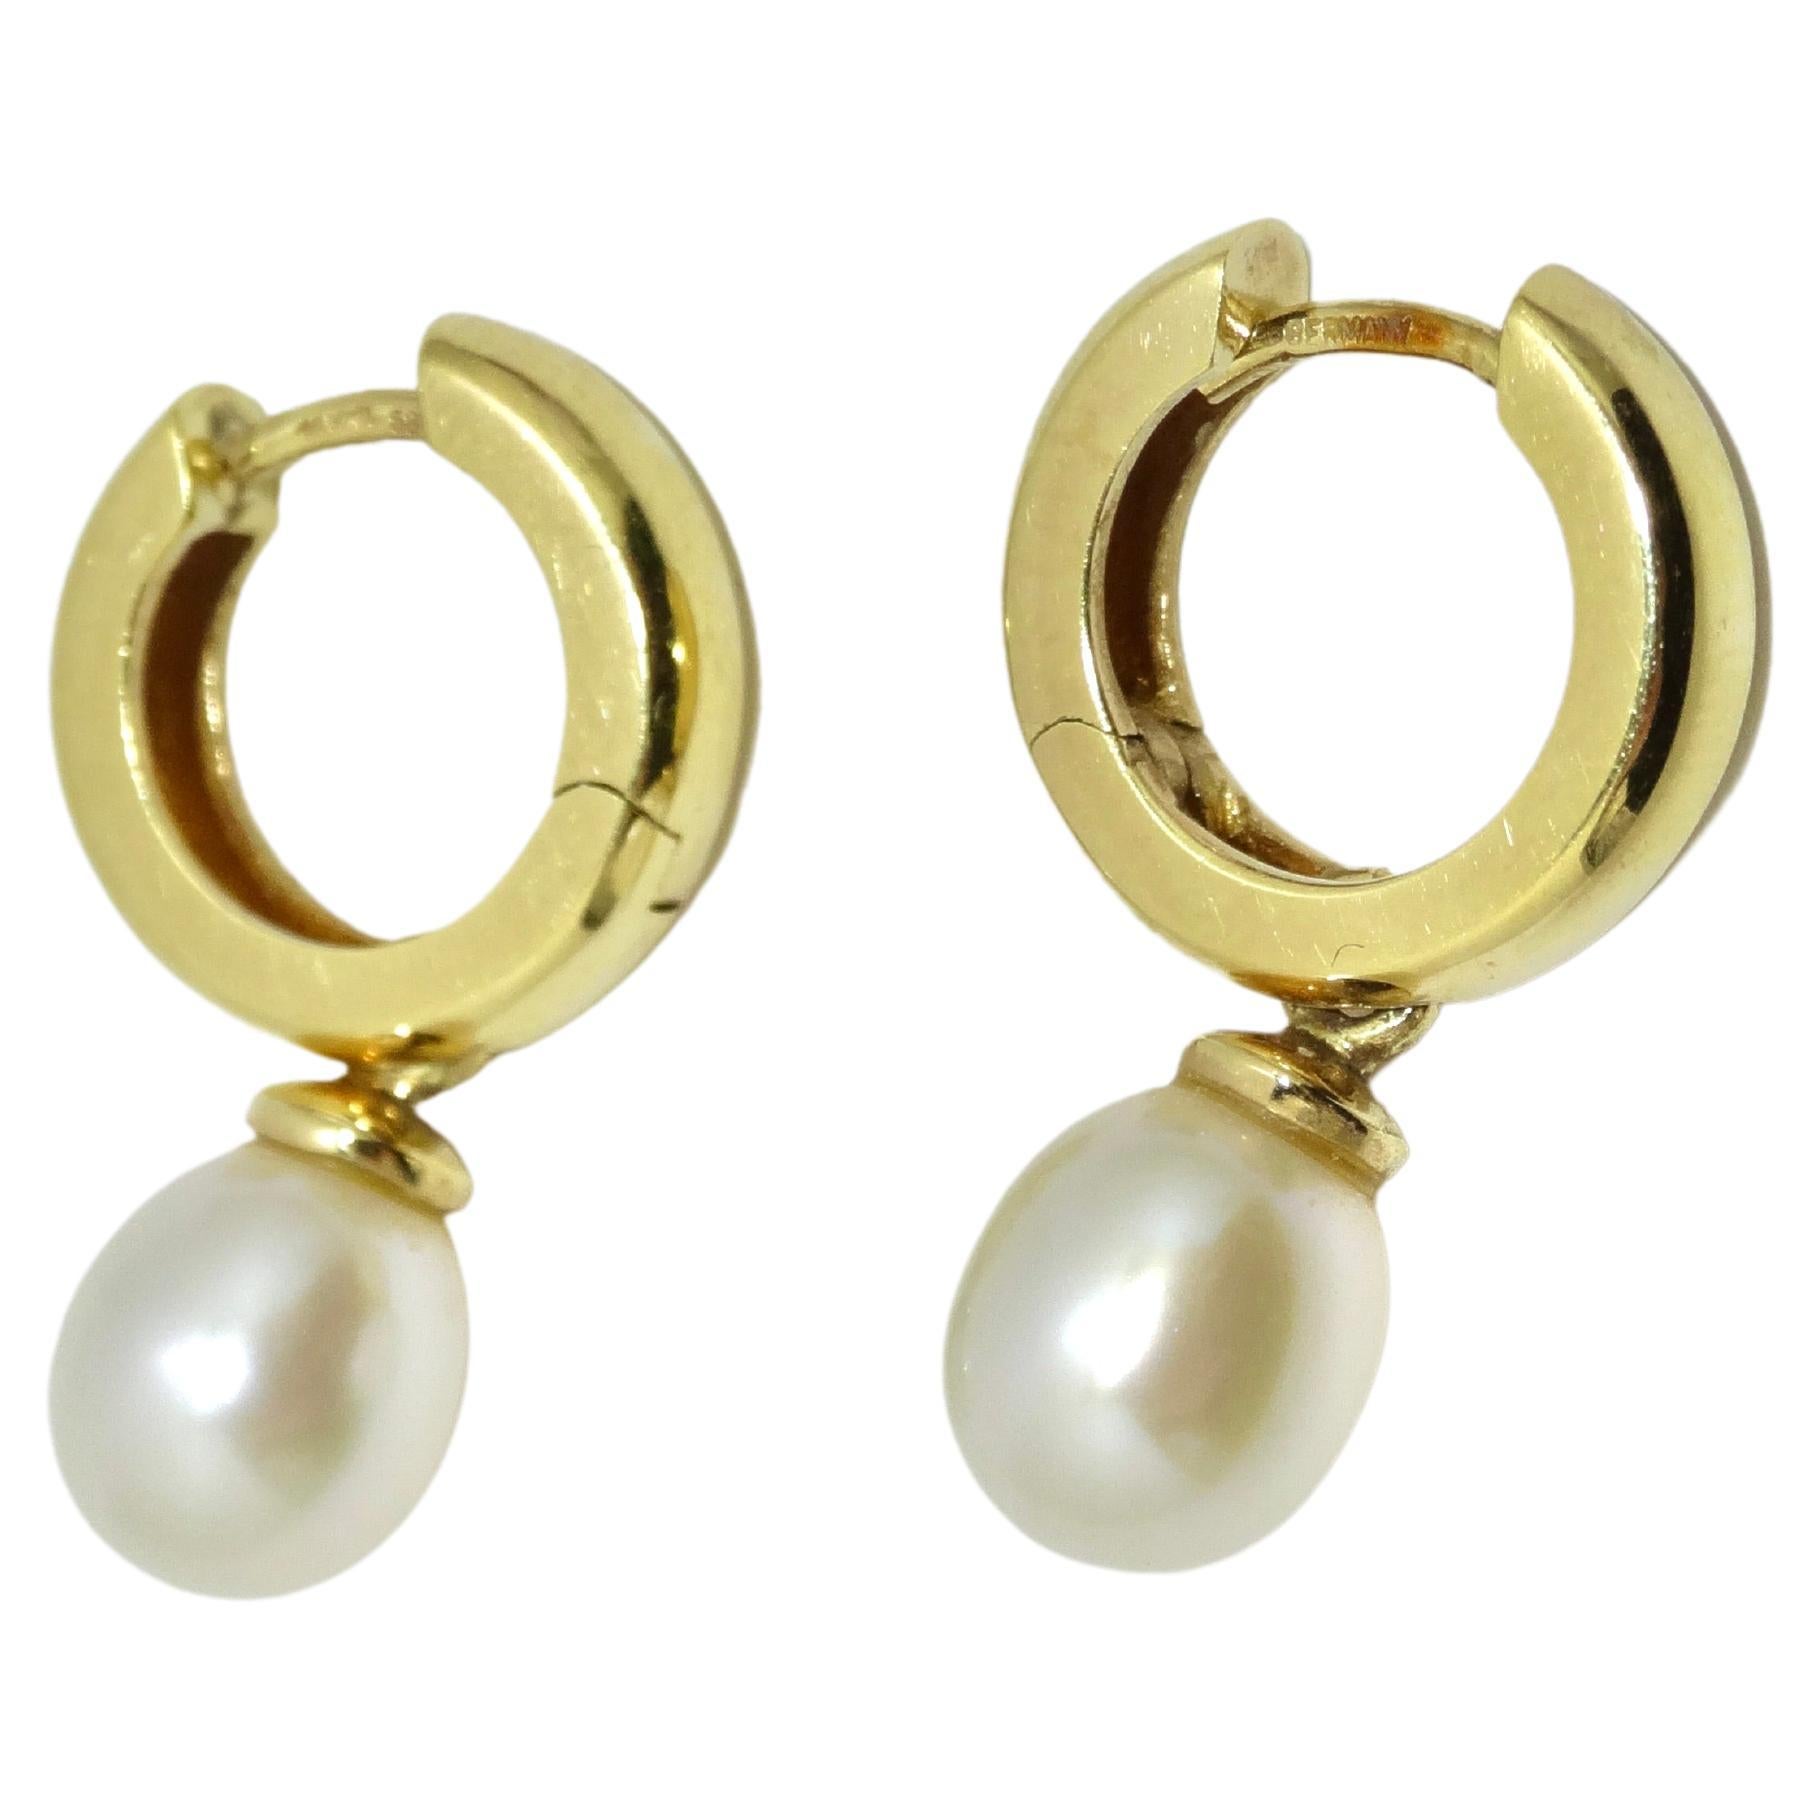 Add a pair of classic pearl earrings to your jewelry collection. You cannot go wrong with the classic gold and pearl combo! It creates a sense of elegance and effortlessness. These are the perfect size to wear day-to-day and with the 14k gold